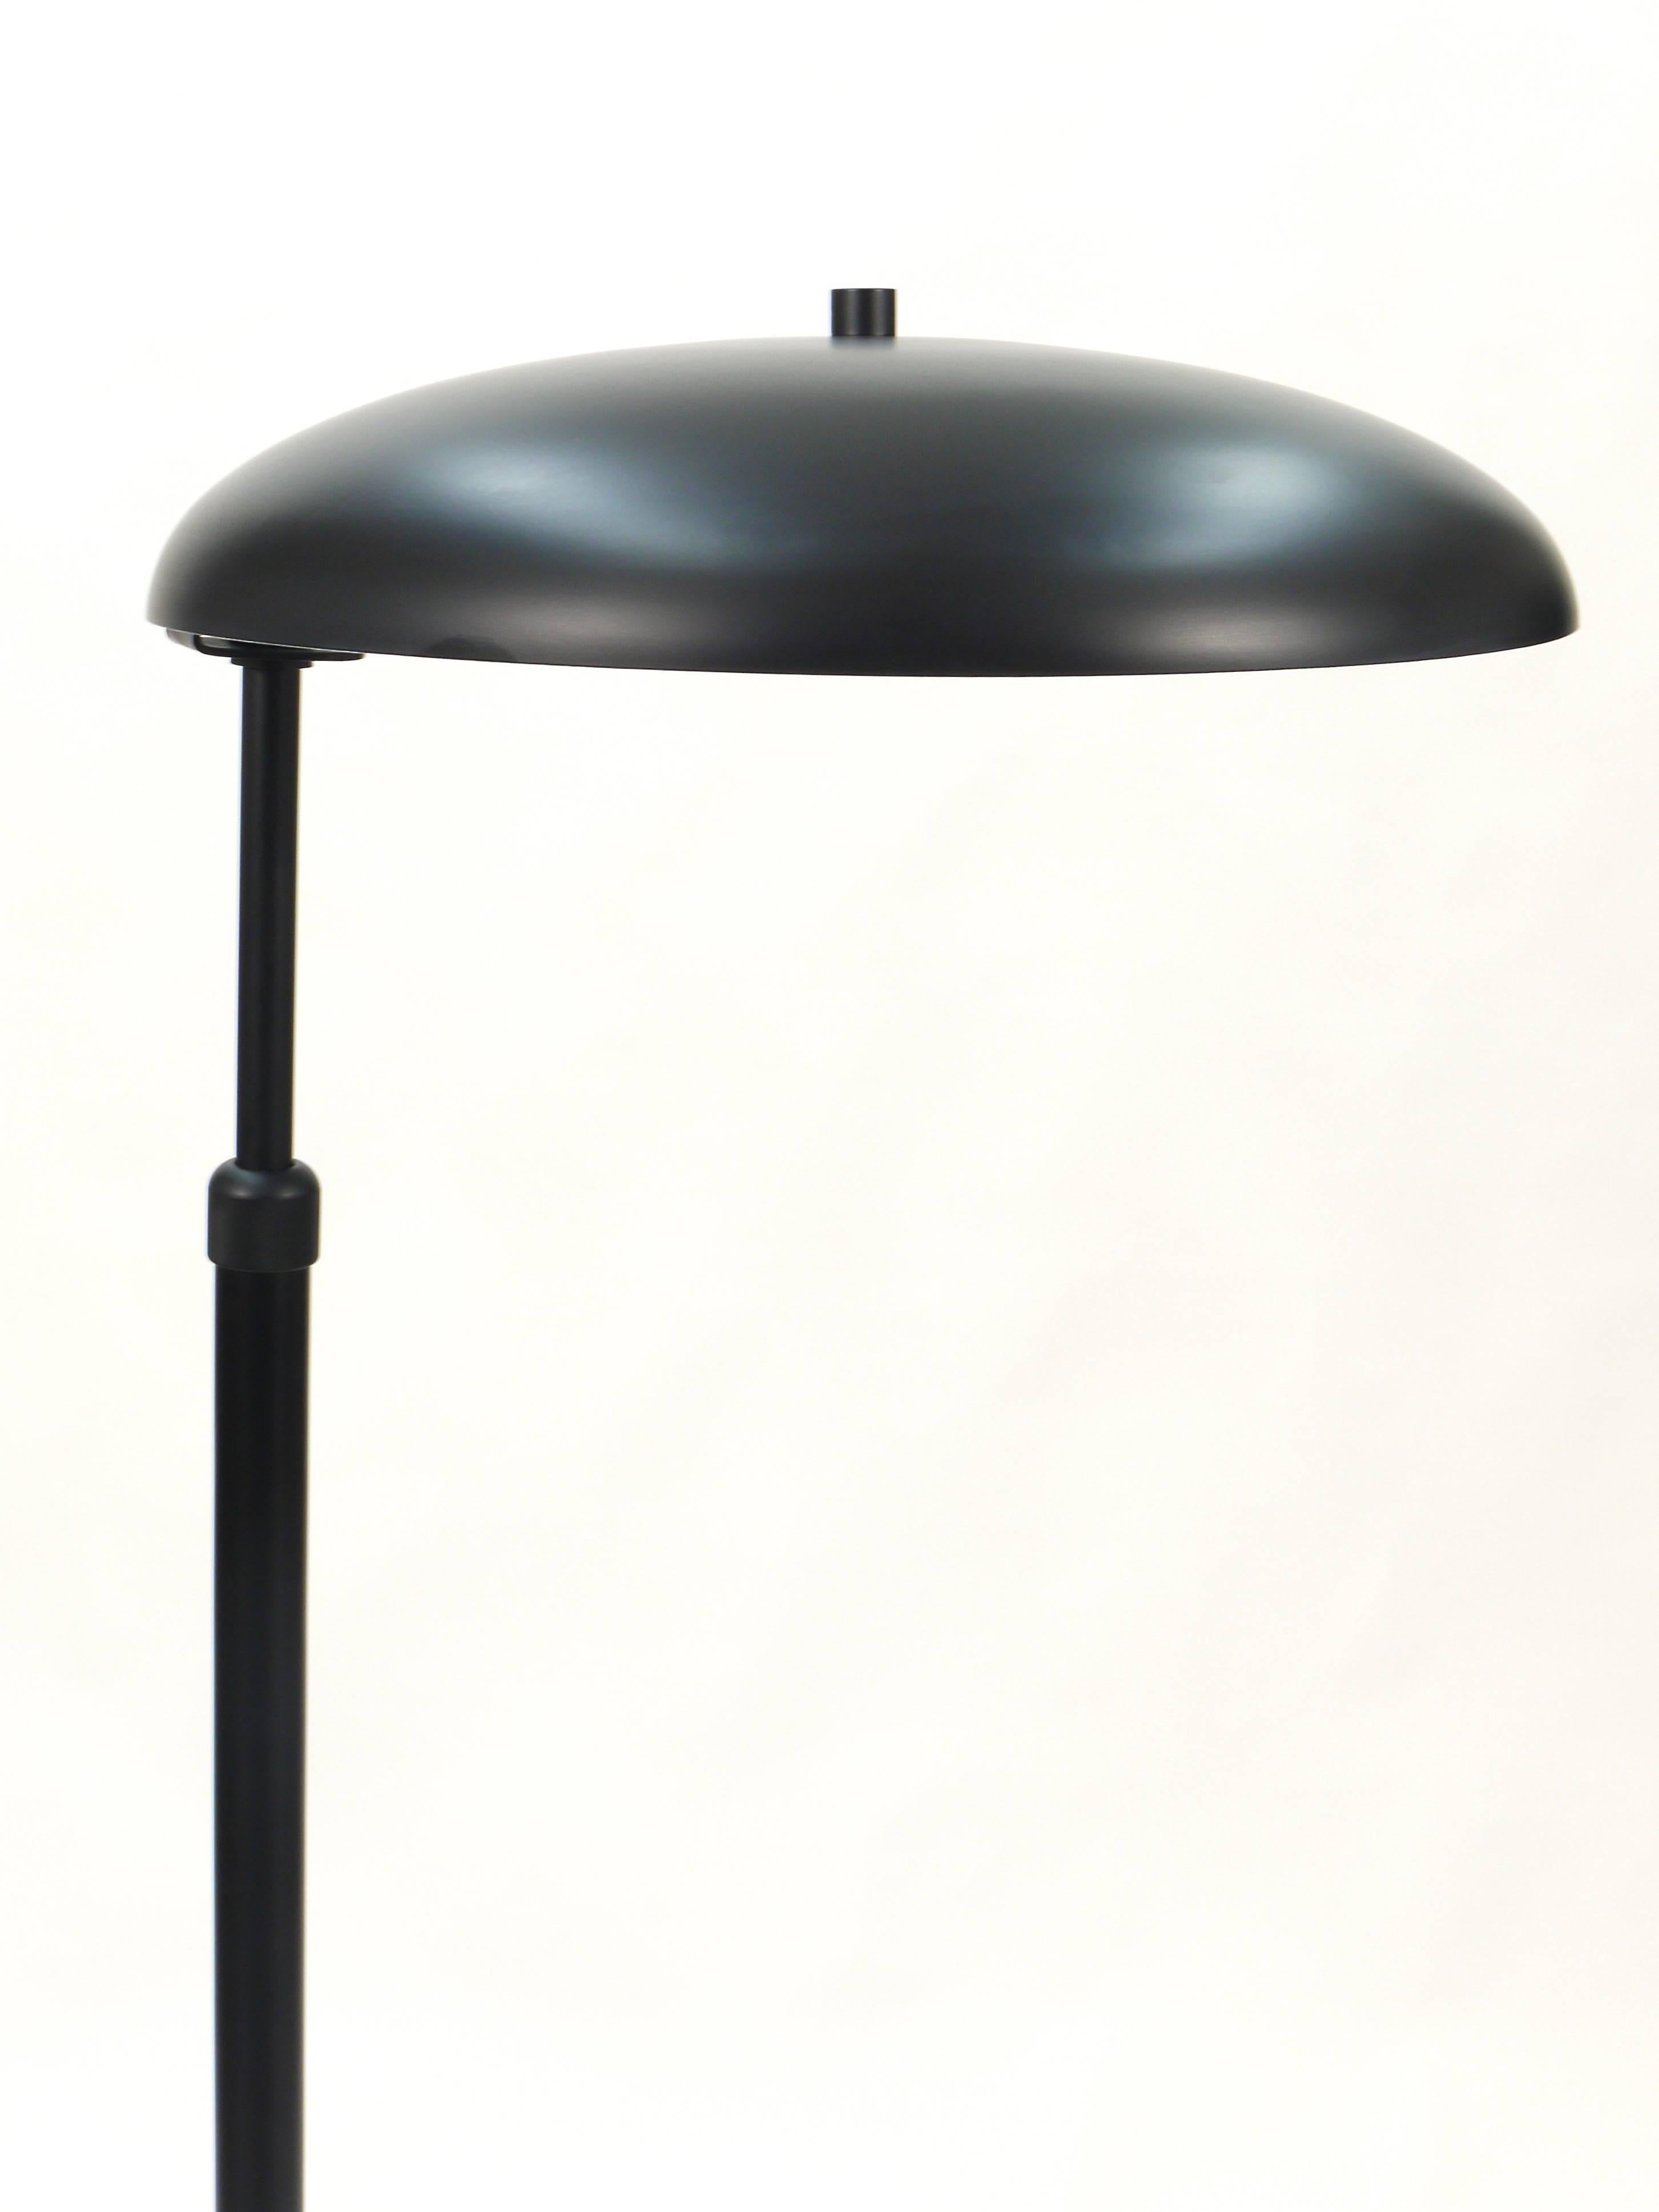 A beautiful telescope floor lamp, height adjustable, made in France in the 1950s. This lamp is height adjustable, professionally restored and rewired. In excellent condition.